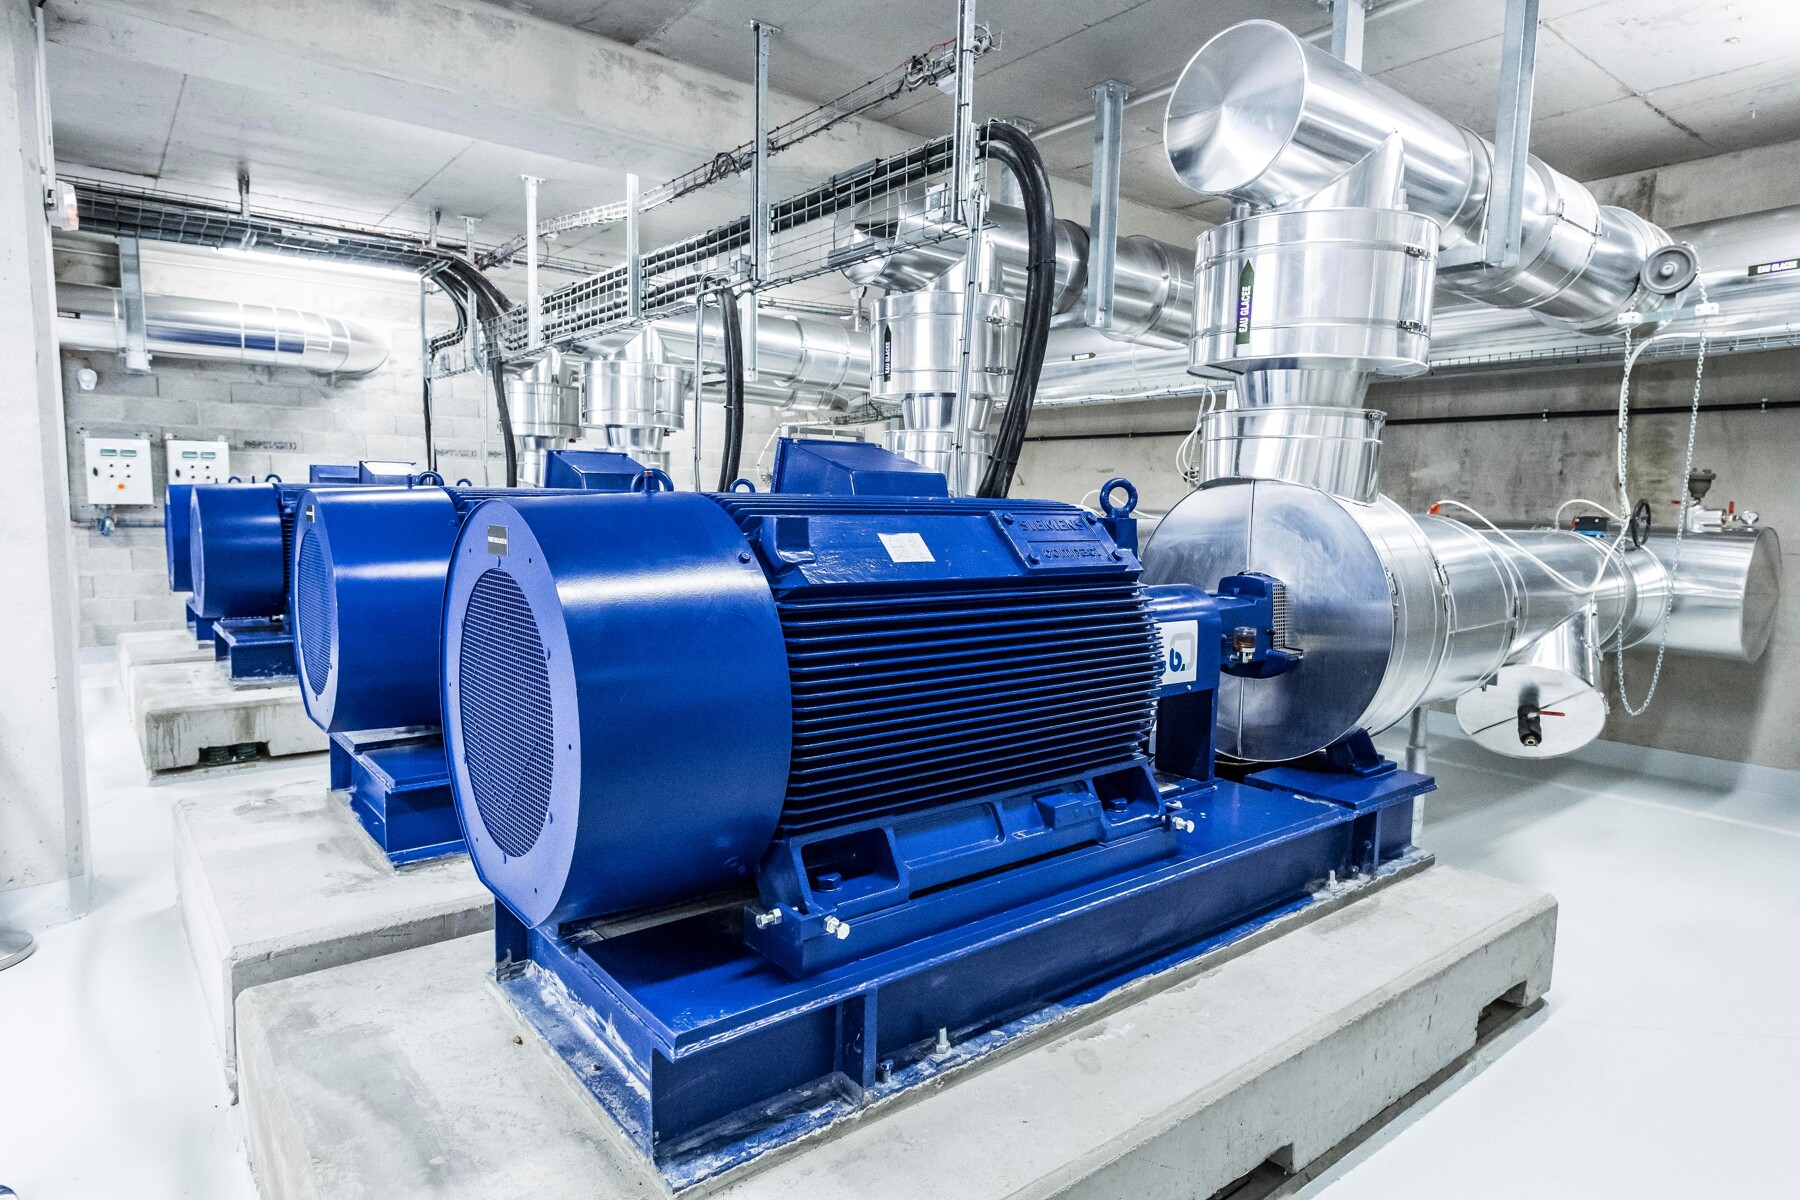 KSB high-performance pumps for the Thalassia geothermal plant